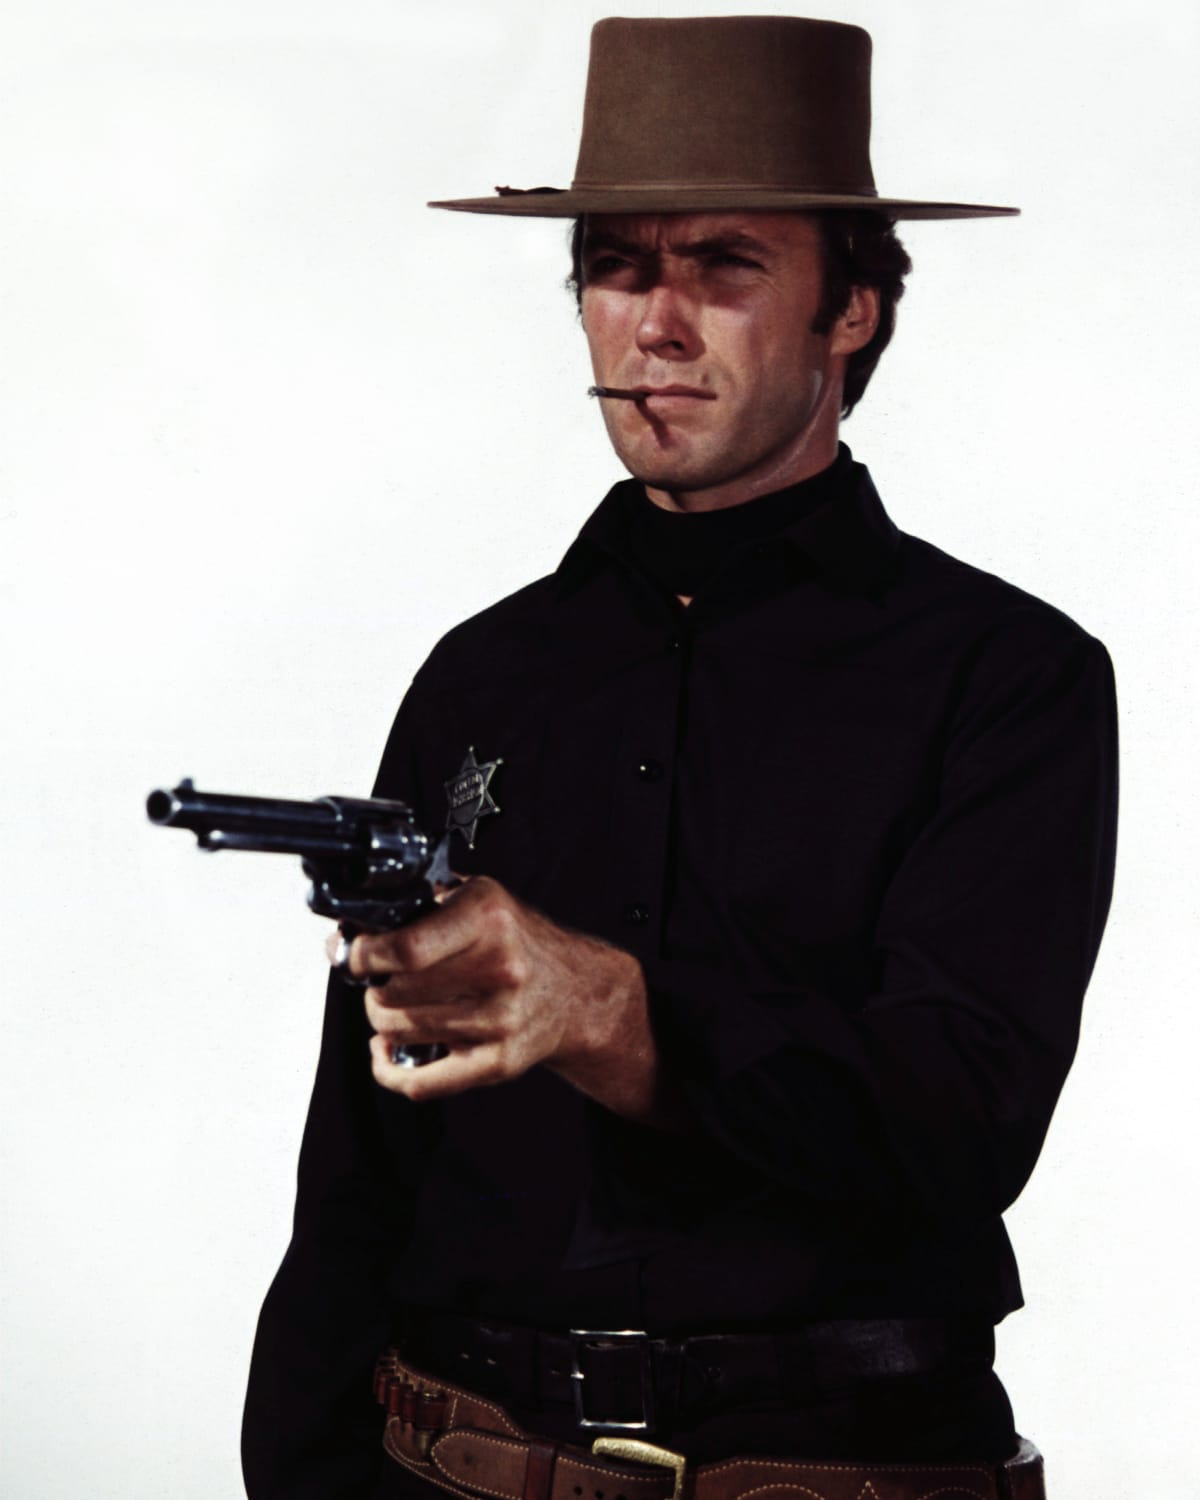 Clint Eastwood in Western attire, smoking a cigar and pointing a gun